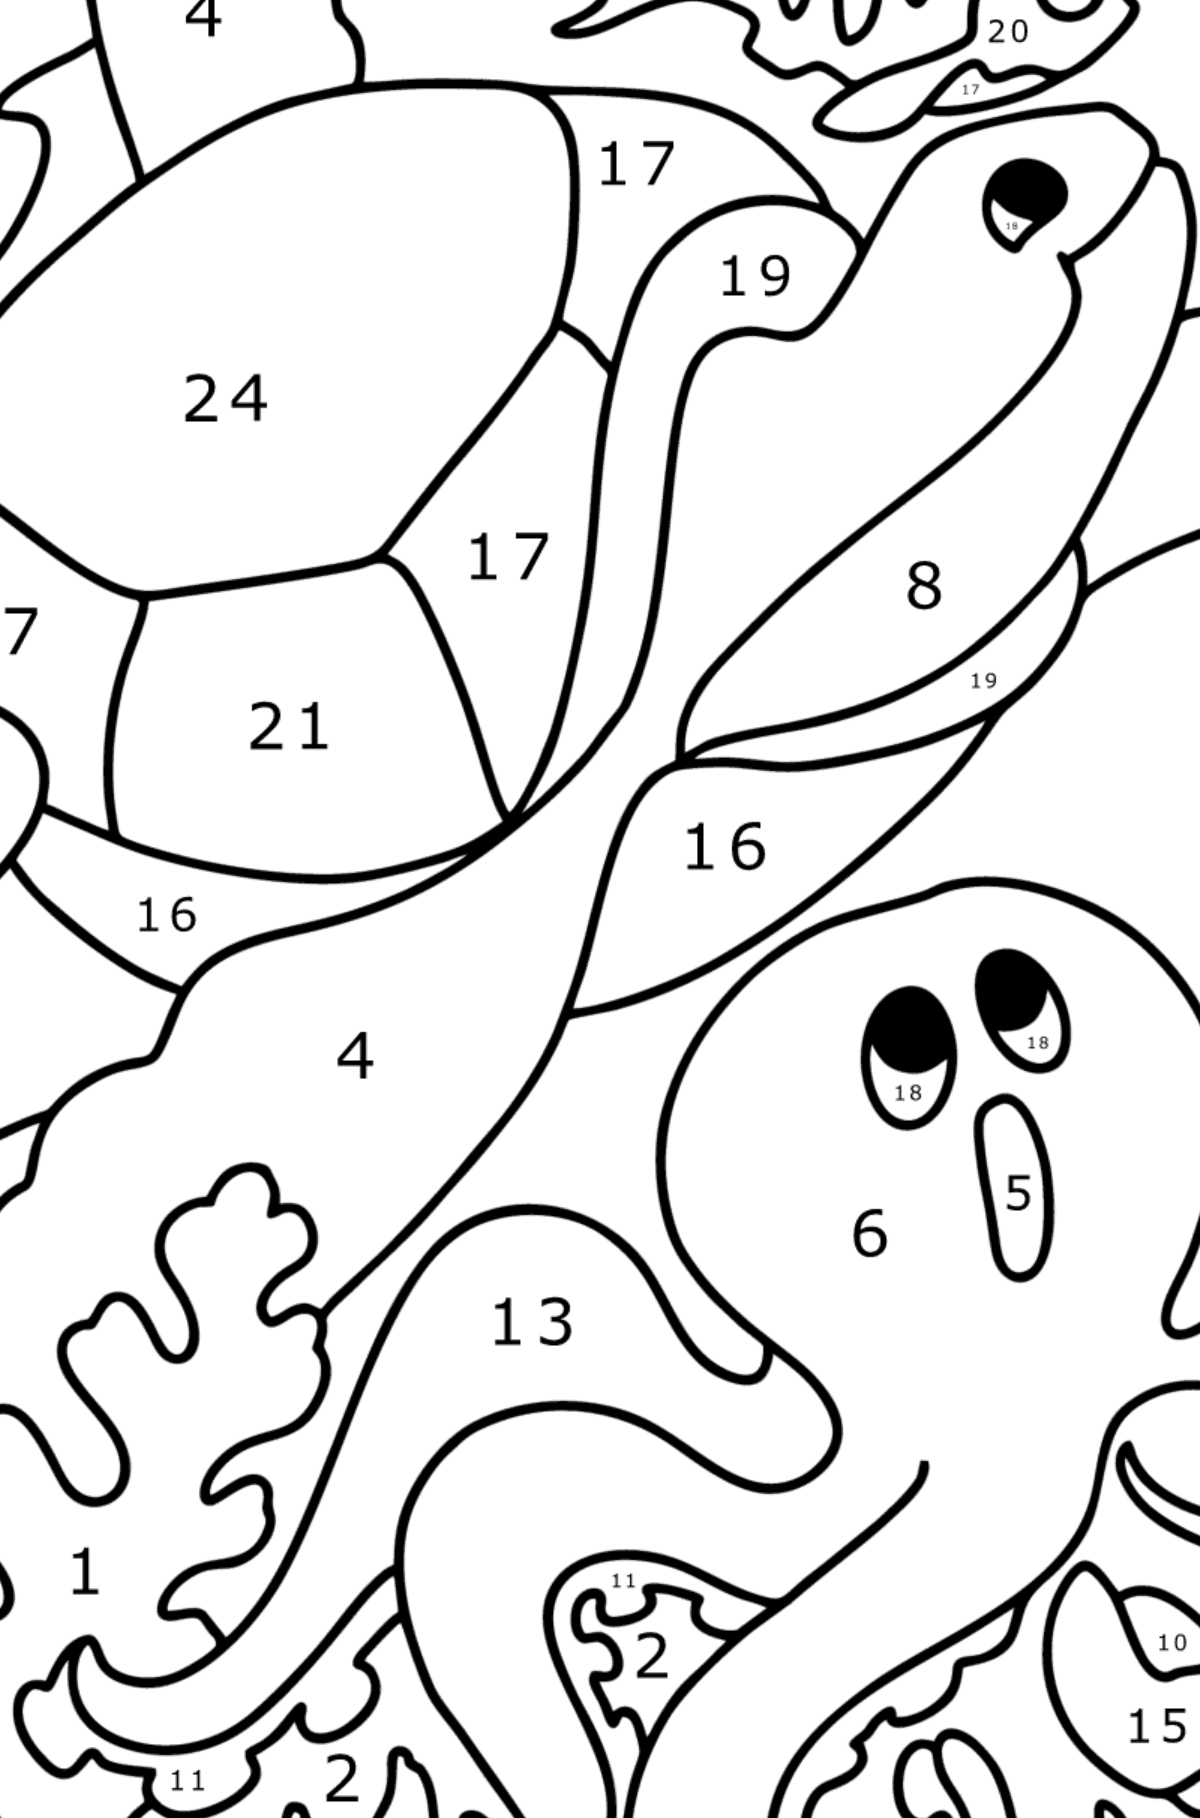 Fish, Turtle, Crab and Octopus coloring page - Coloring by Numbers for Kids